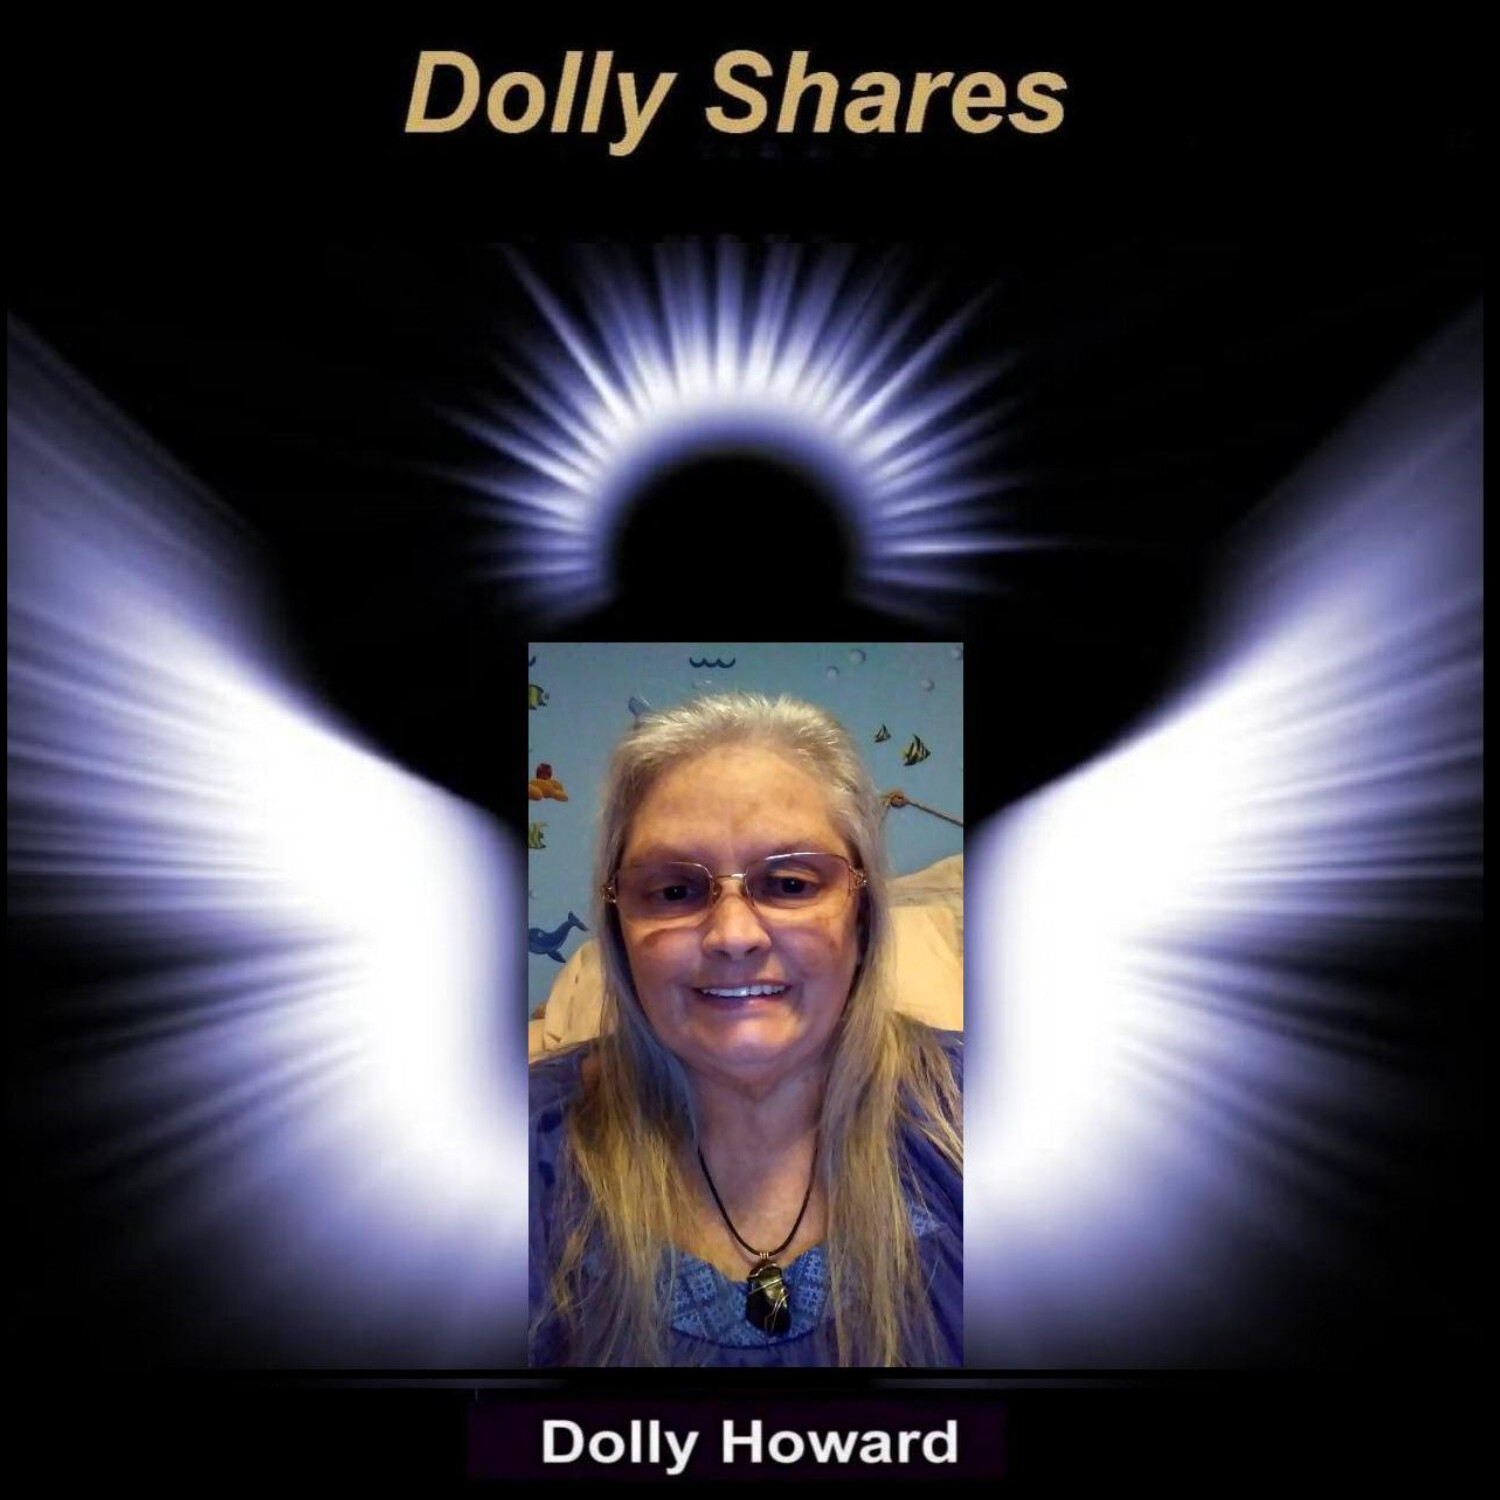 “Dolly Shares” 5/19/21 with Dolly Howard - Updates from Dave Corso